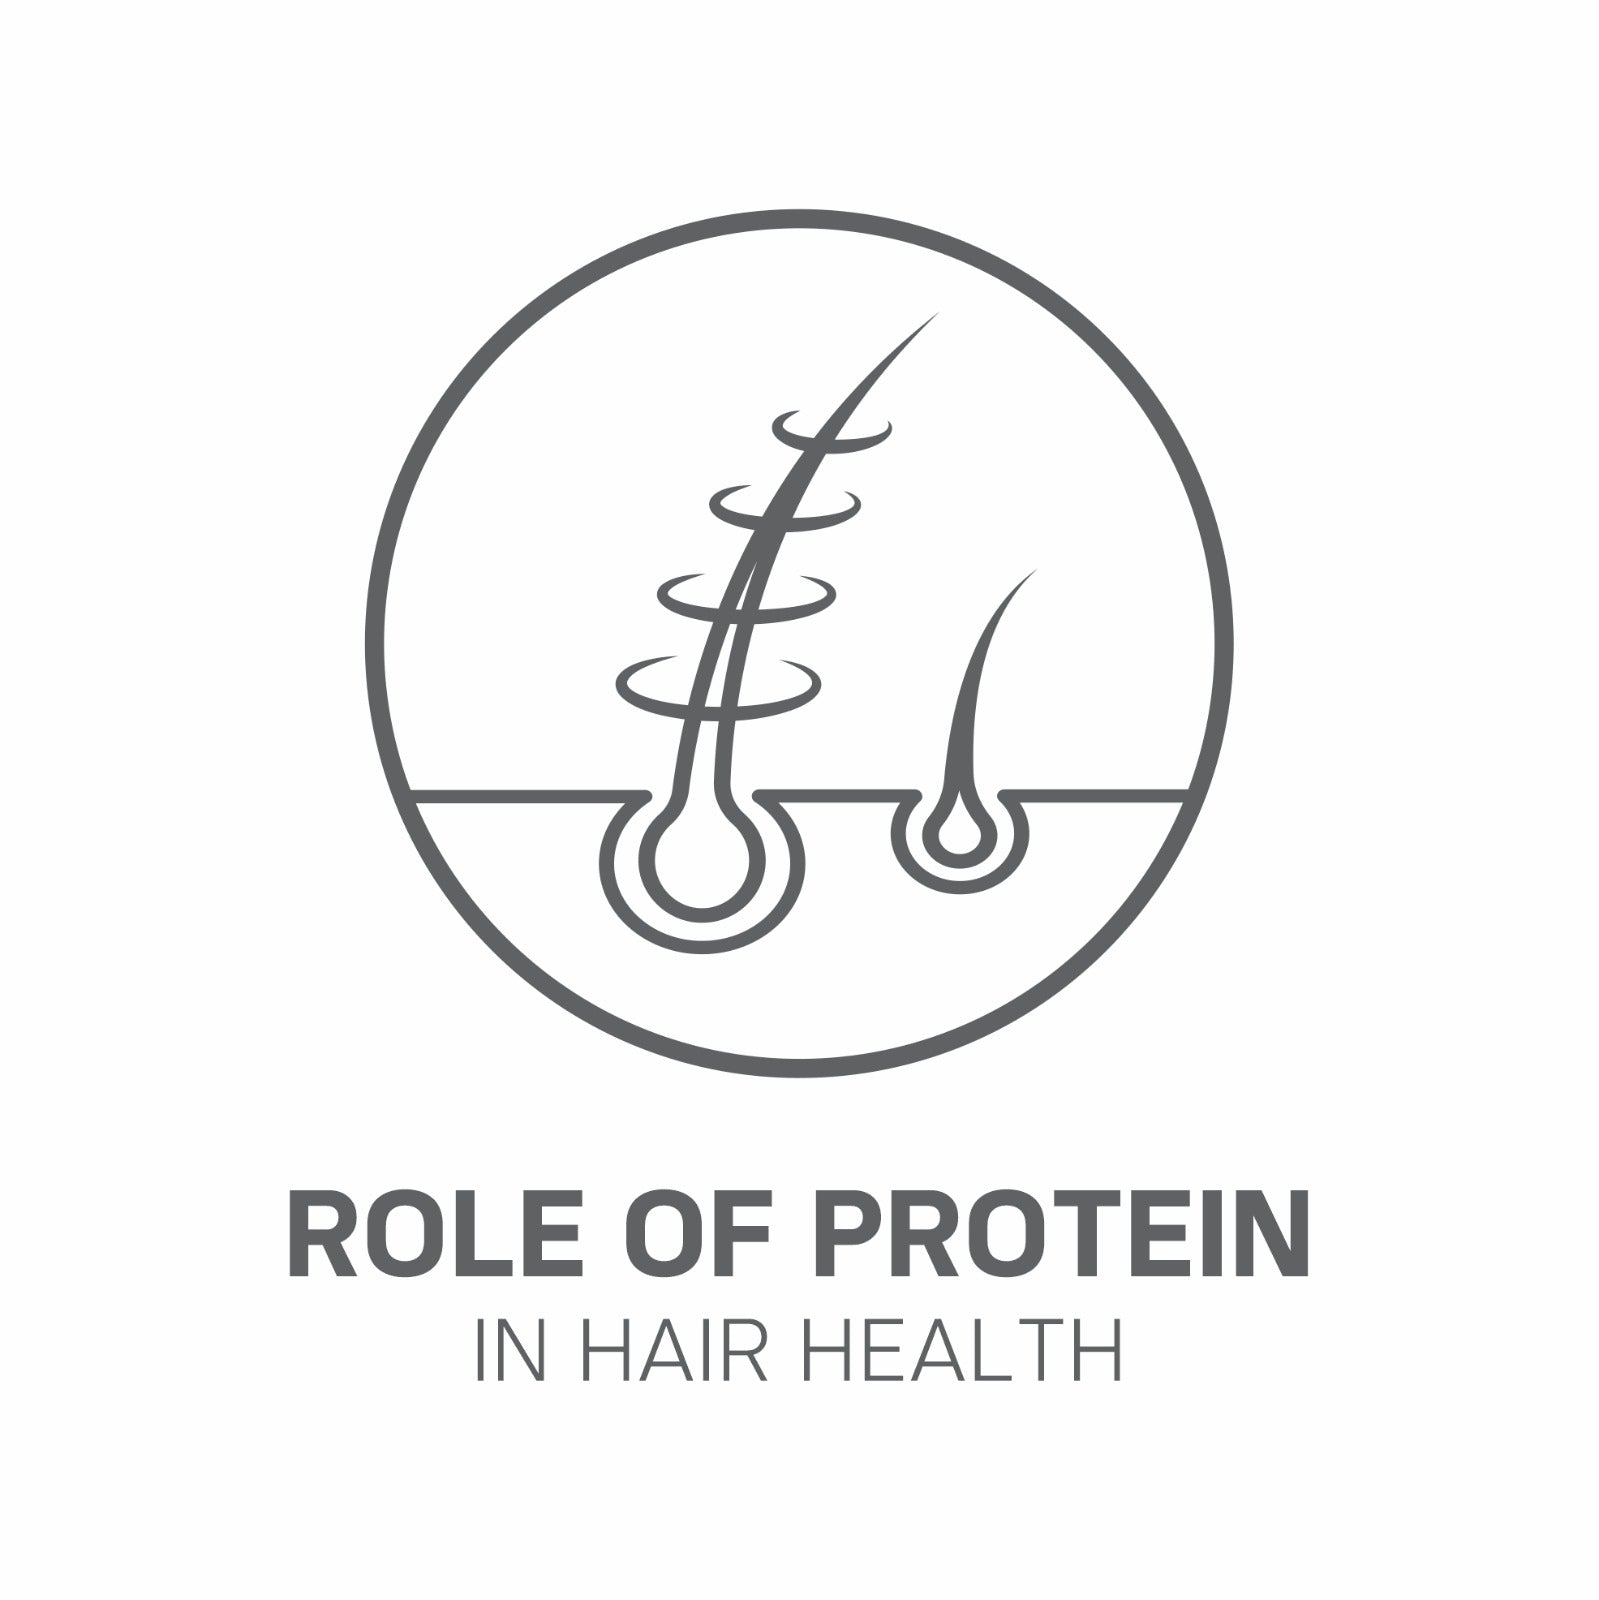 The role of protien in hair health